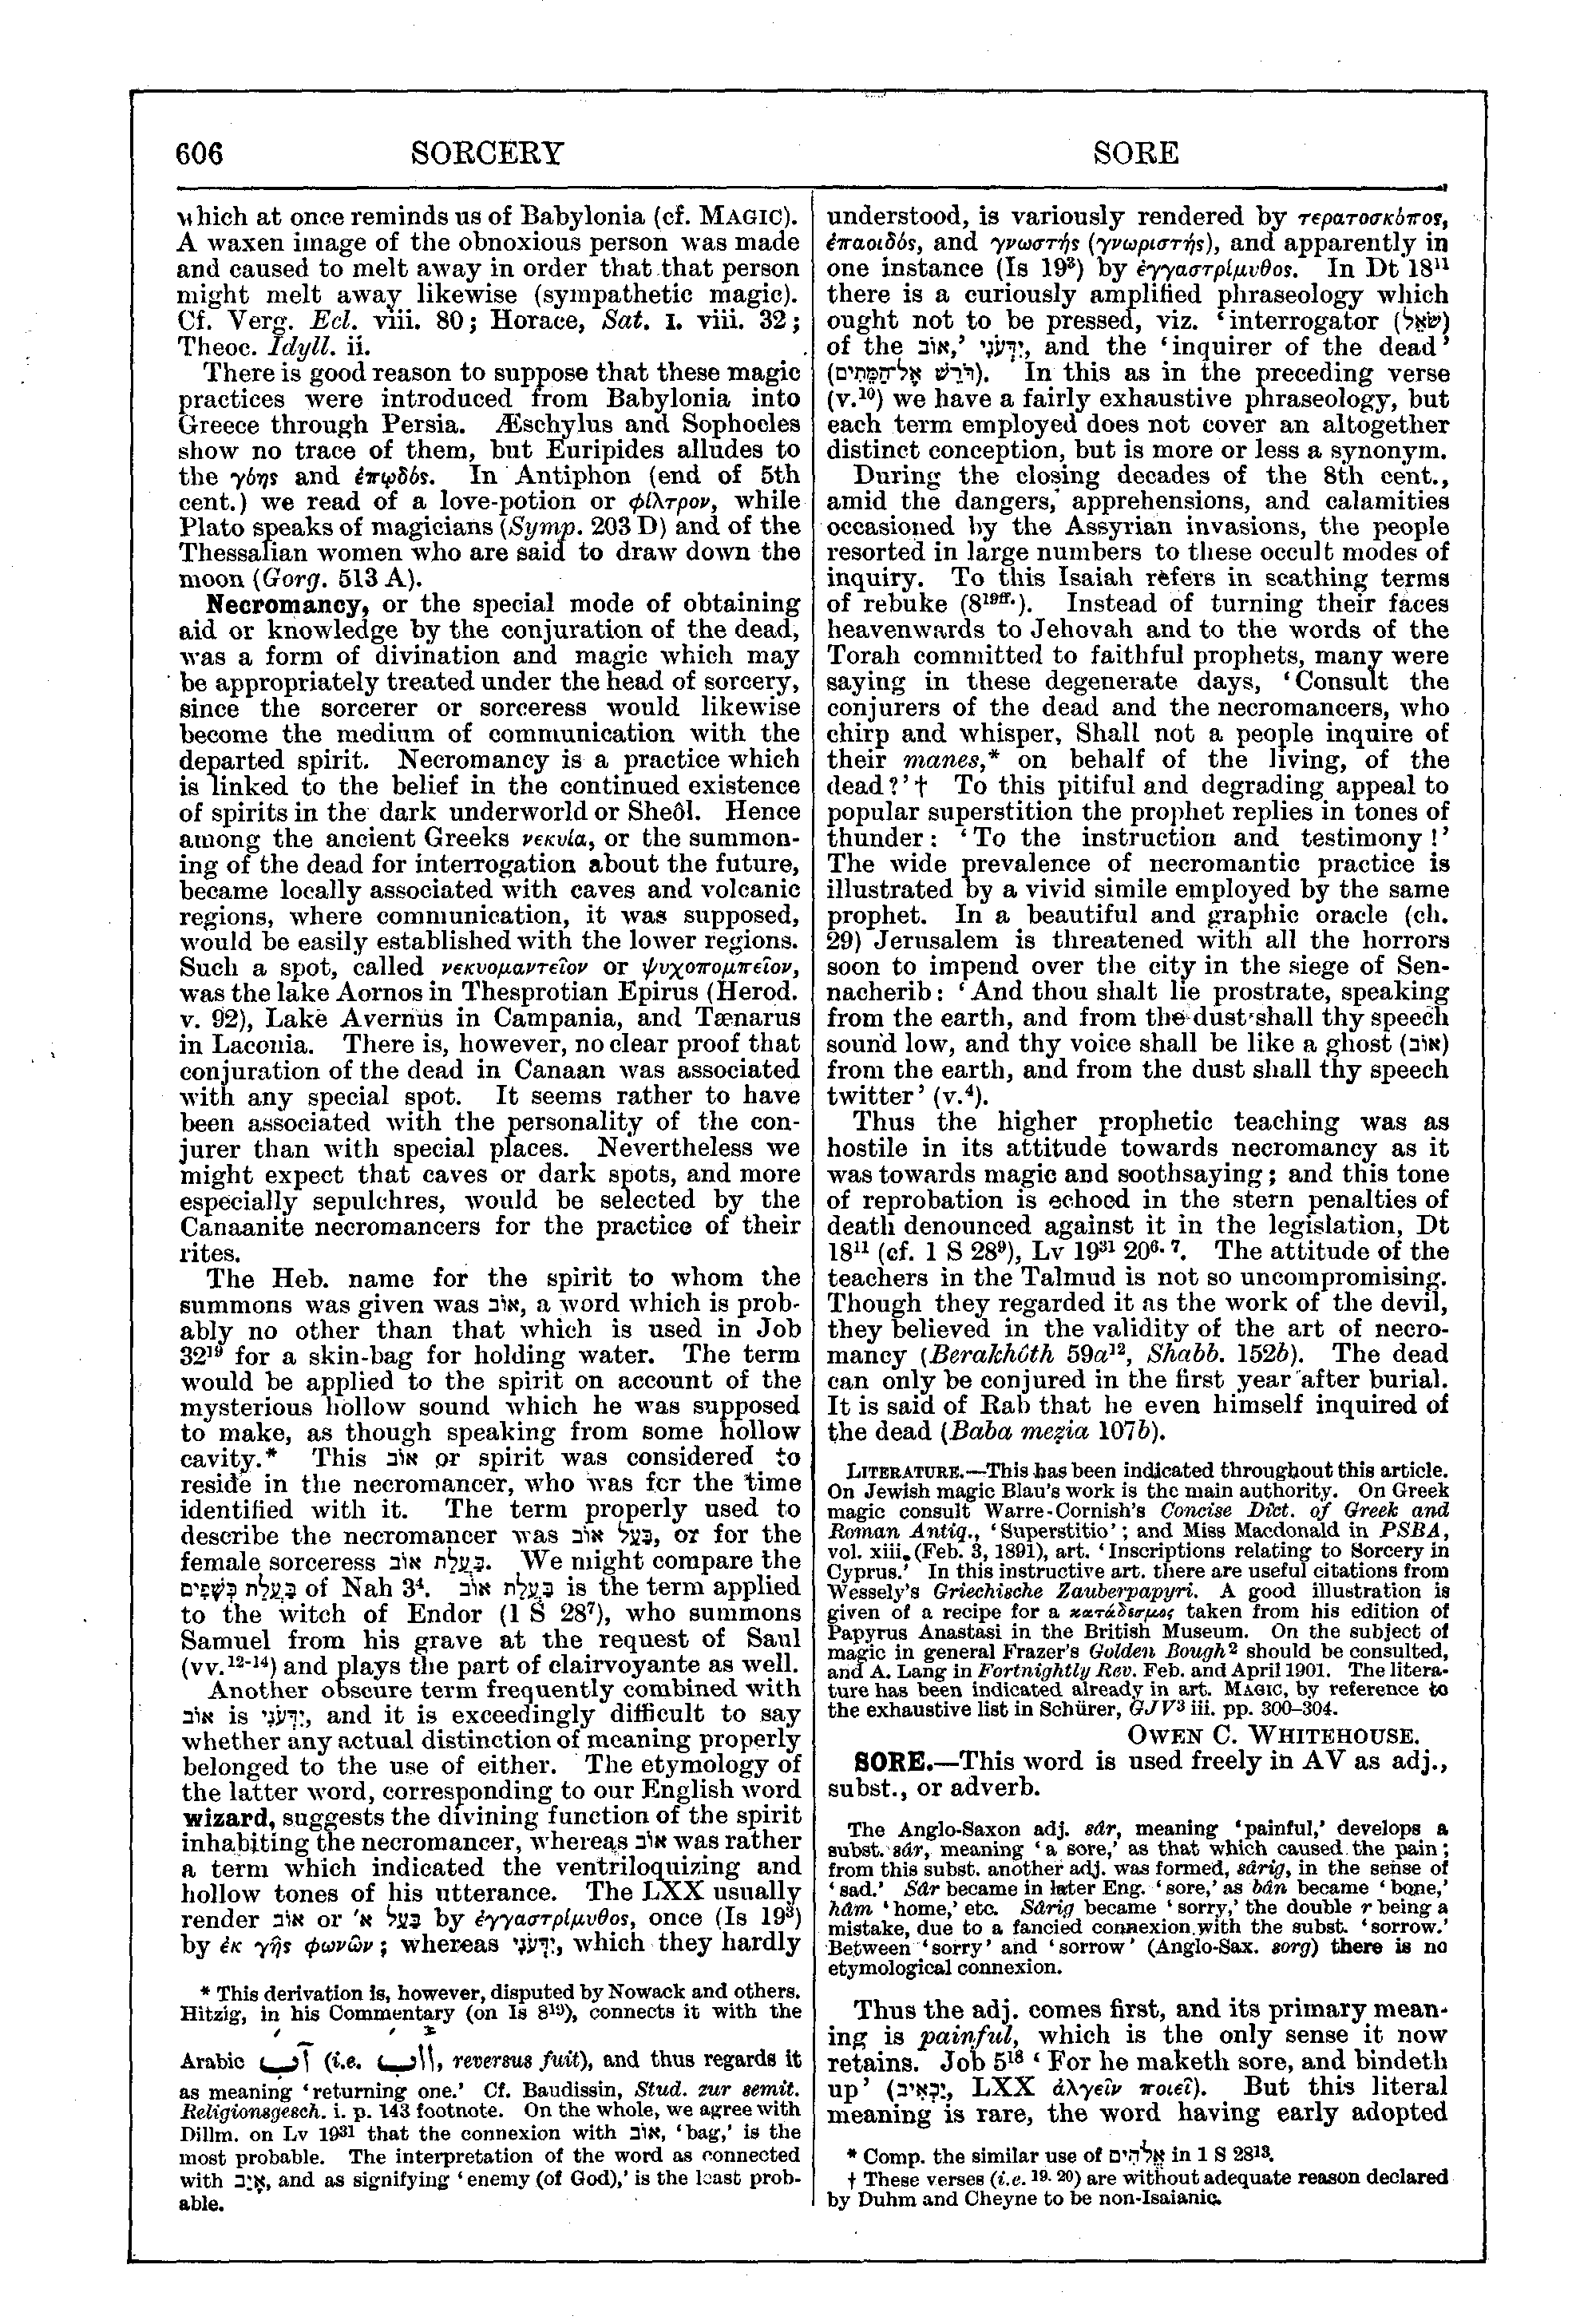 Image of page 606